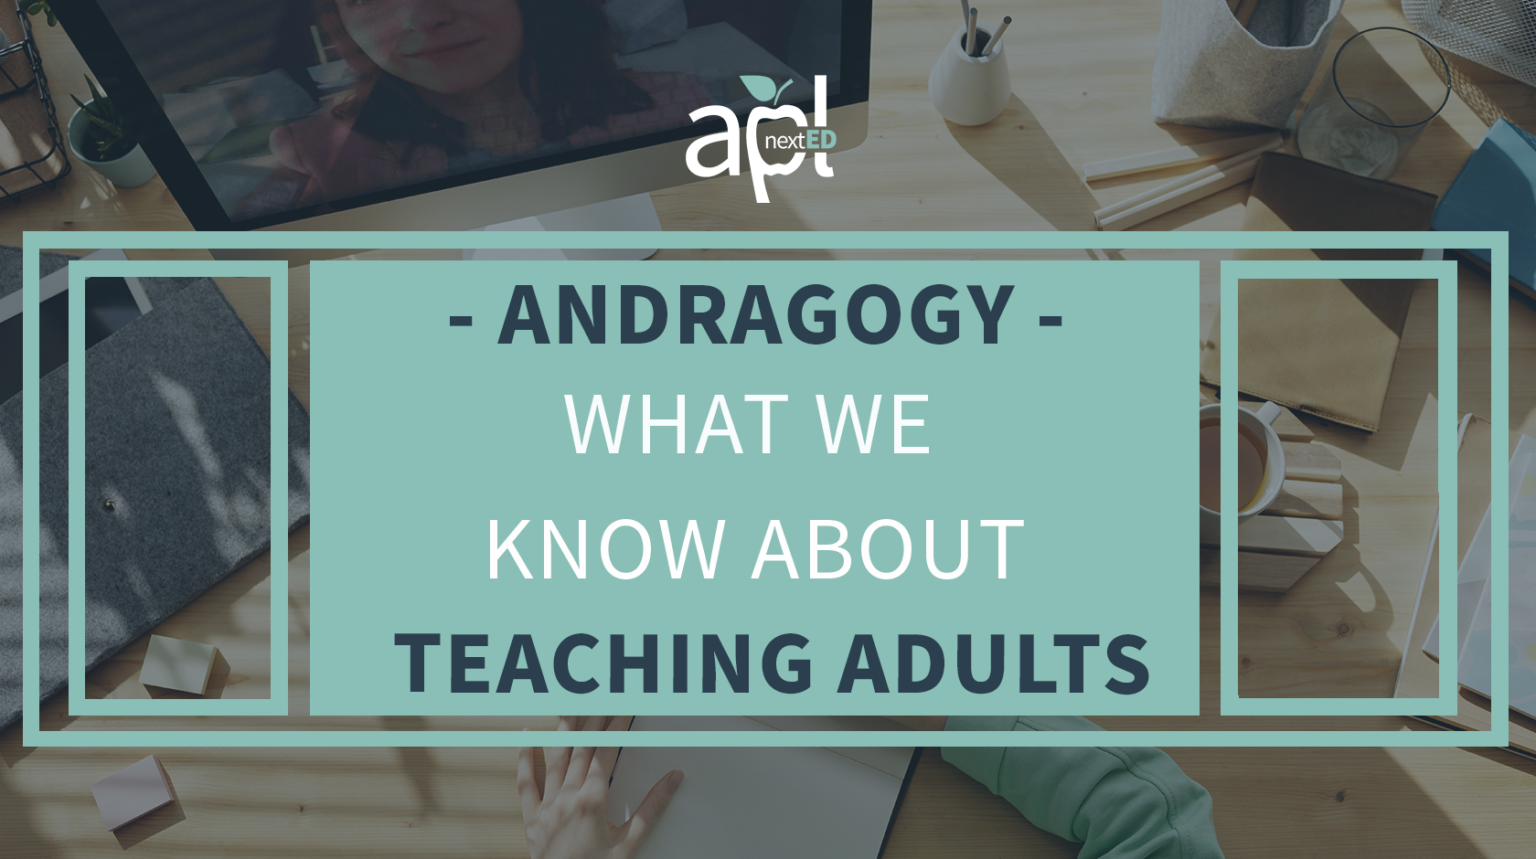 Andragogy - What we know about teaching adults